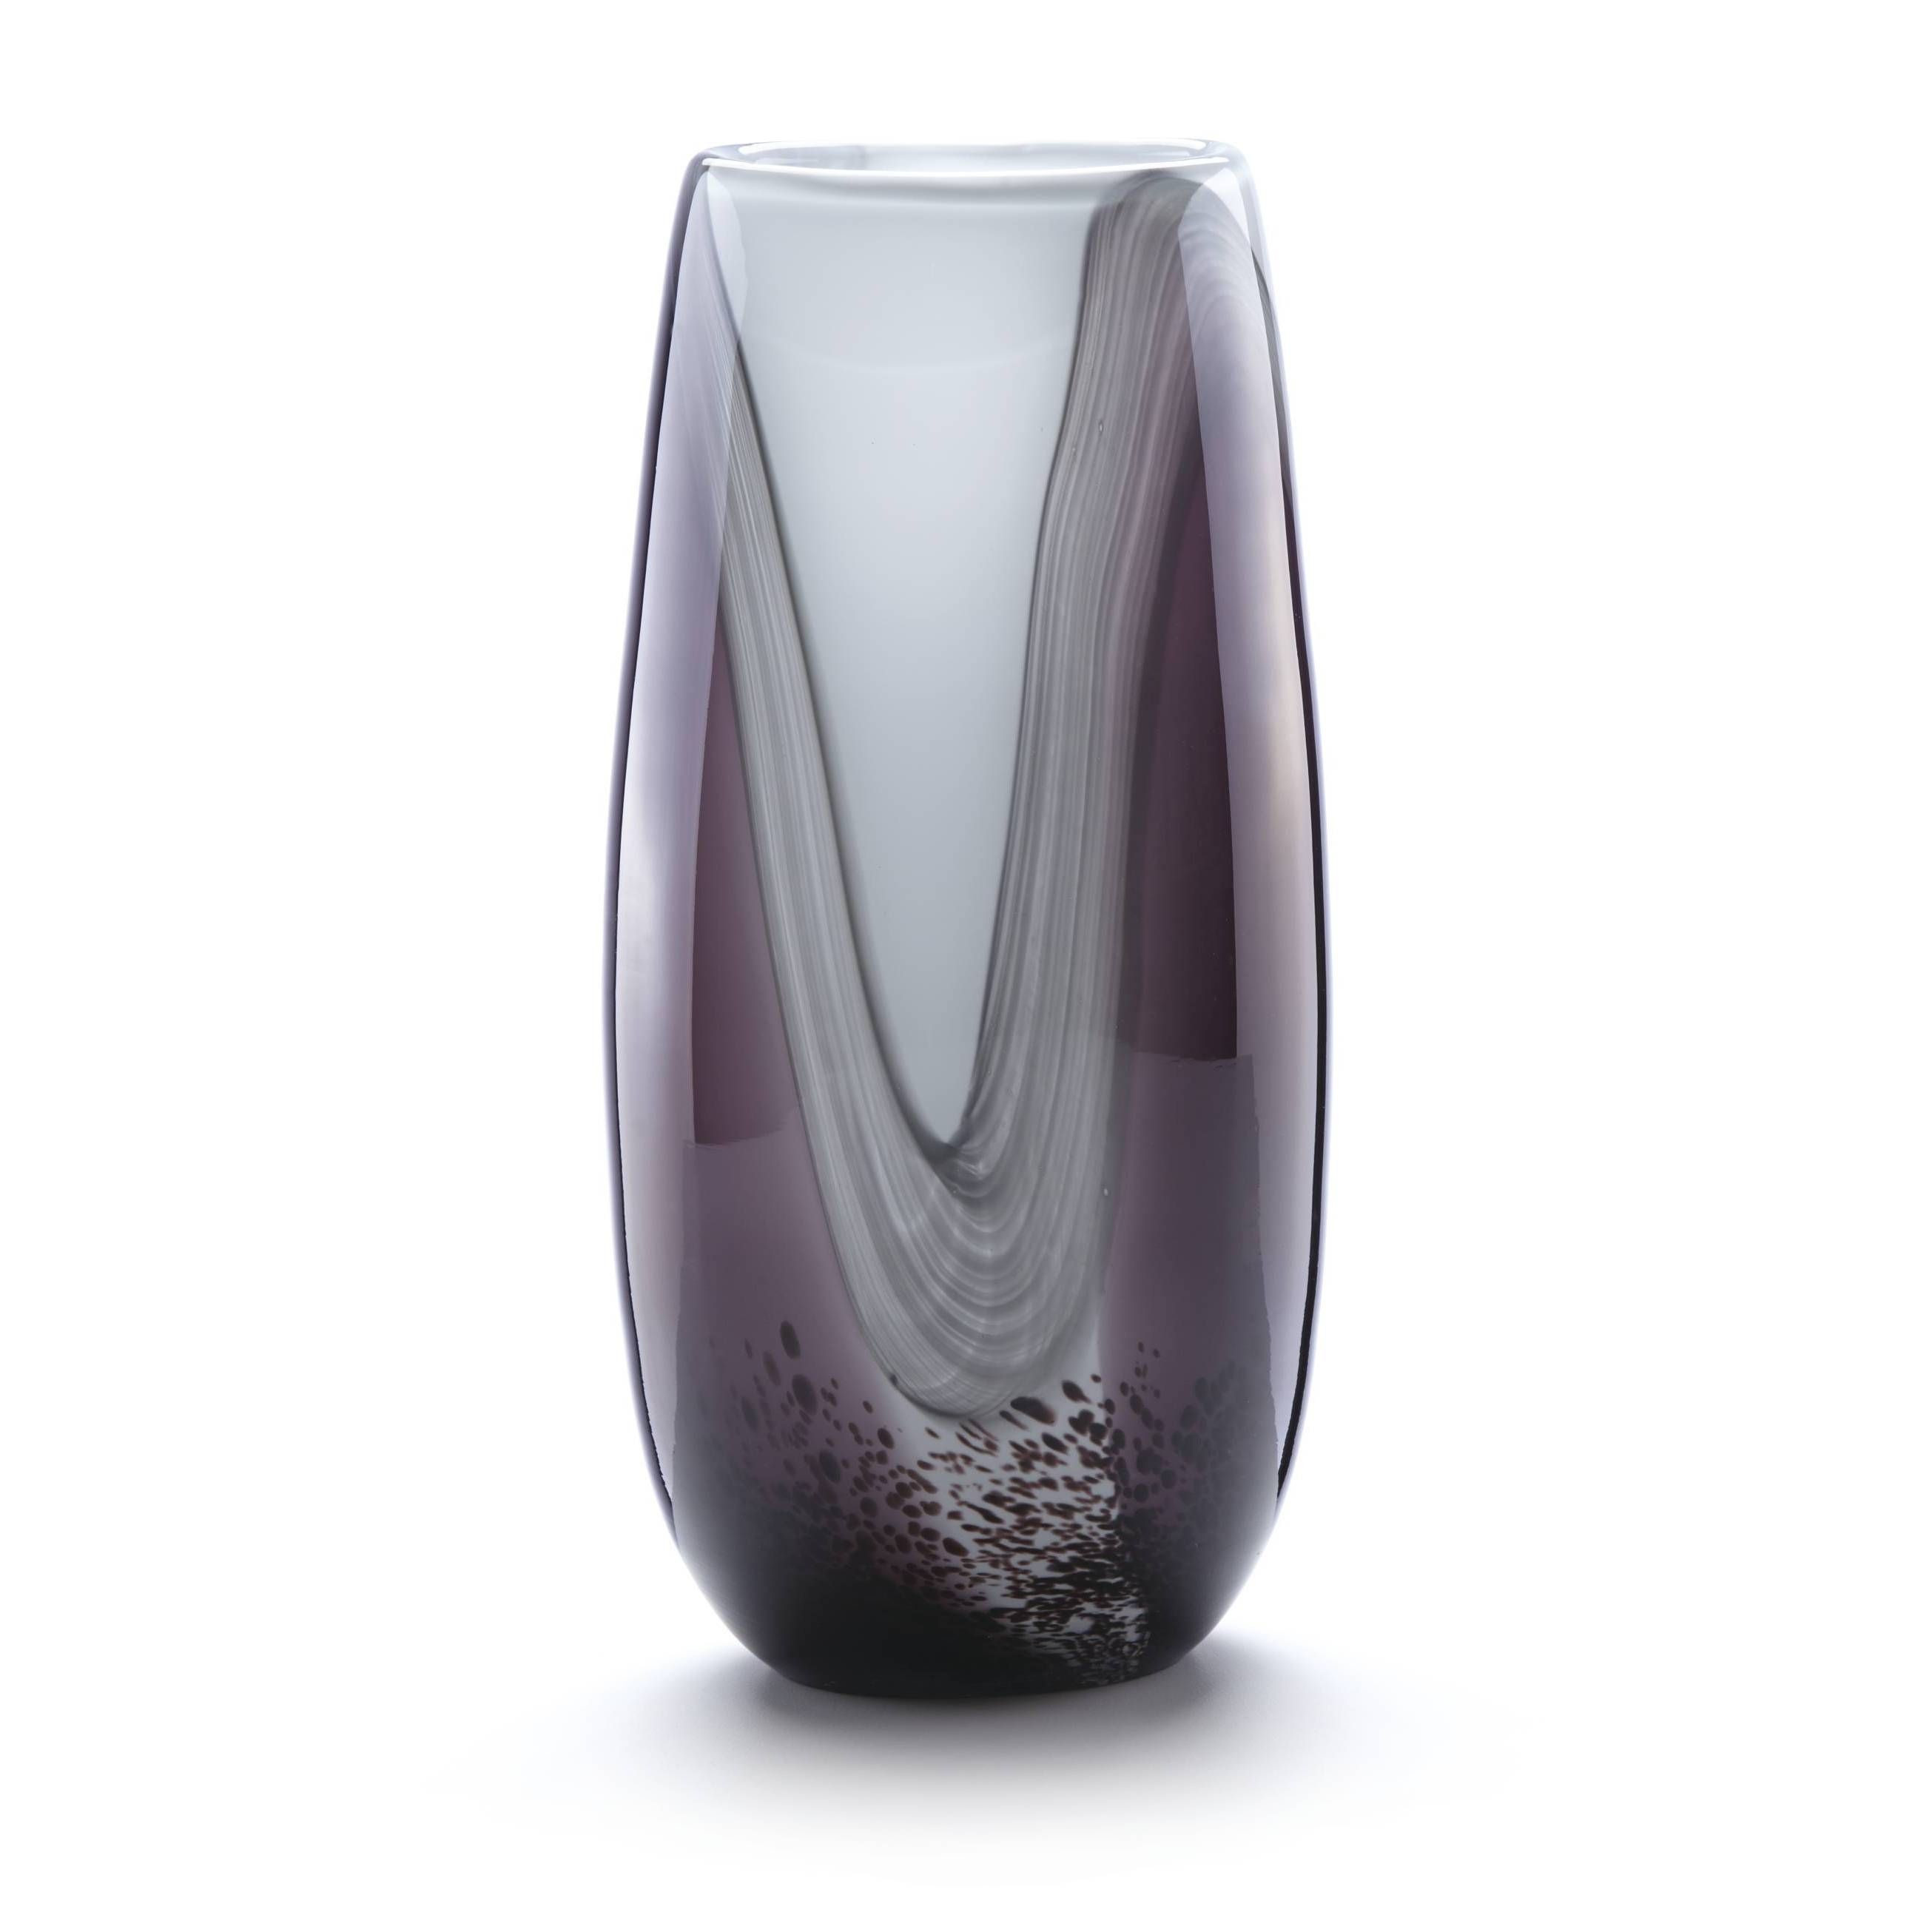 27 Amazing Lenox Small Bud Vase 2024 free download lenox small bud vase of lenox novia purple crystal 11 inch large vase outlet store and with regard to lenox novia purple crystal 11 inch large vase novia grey size